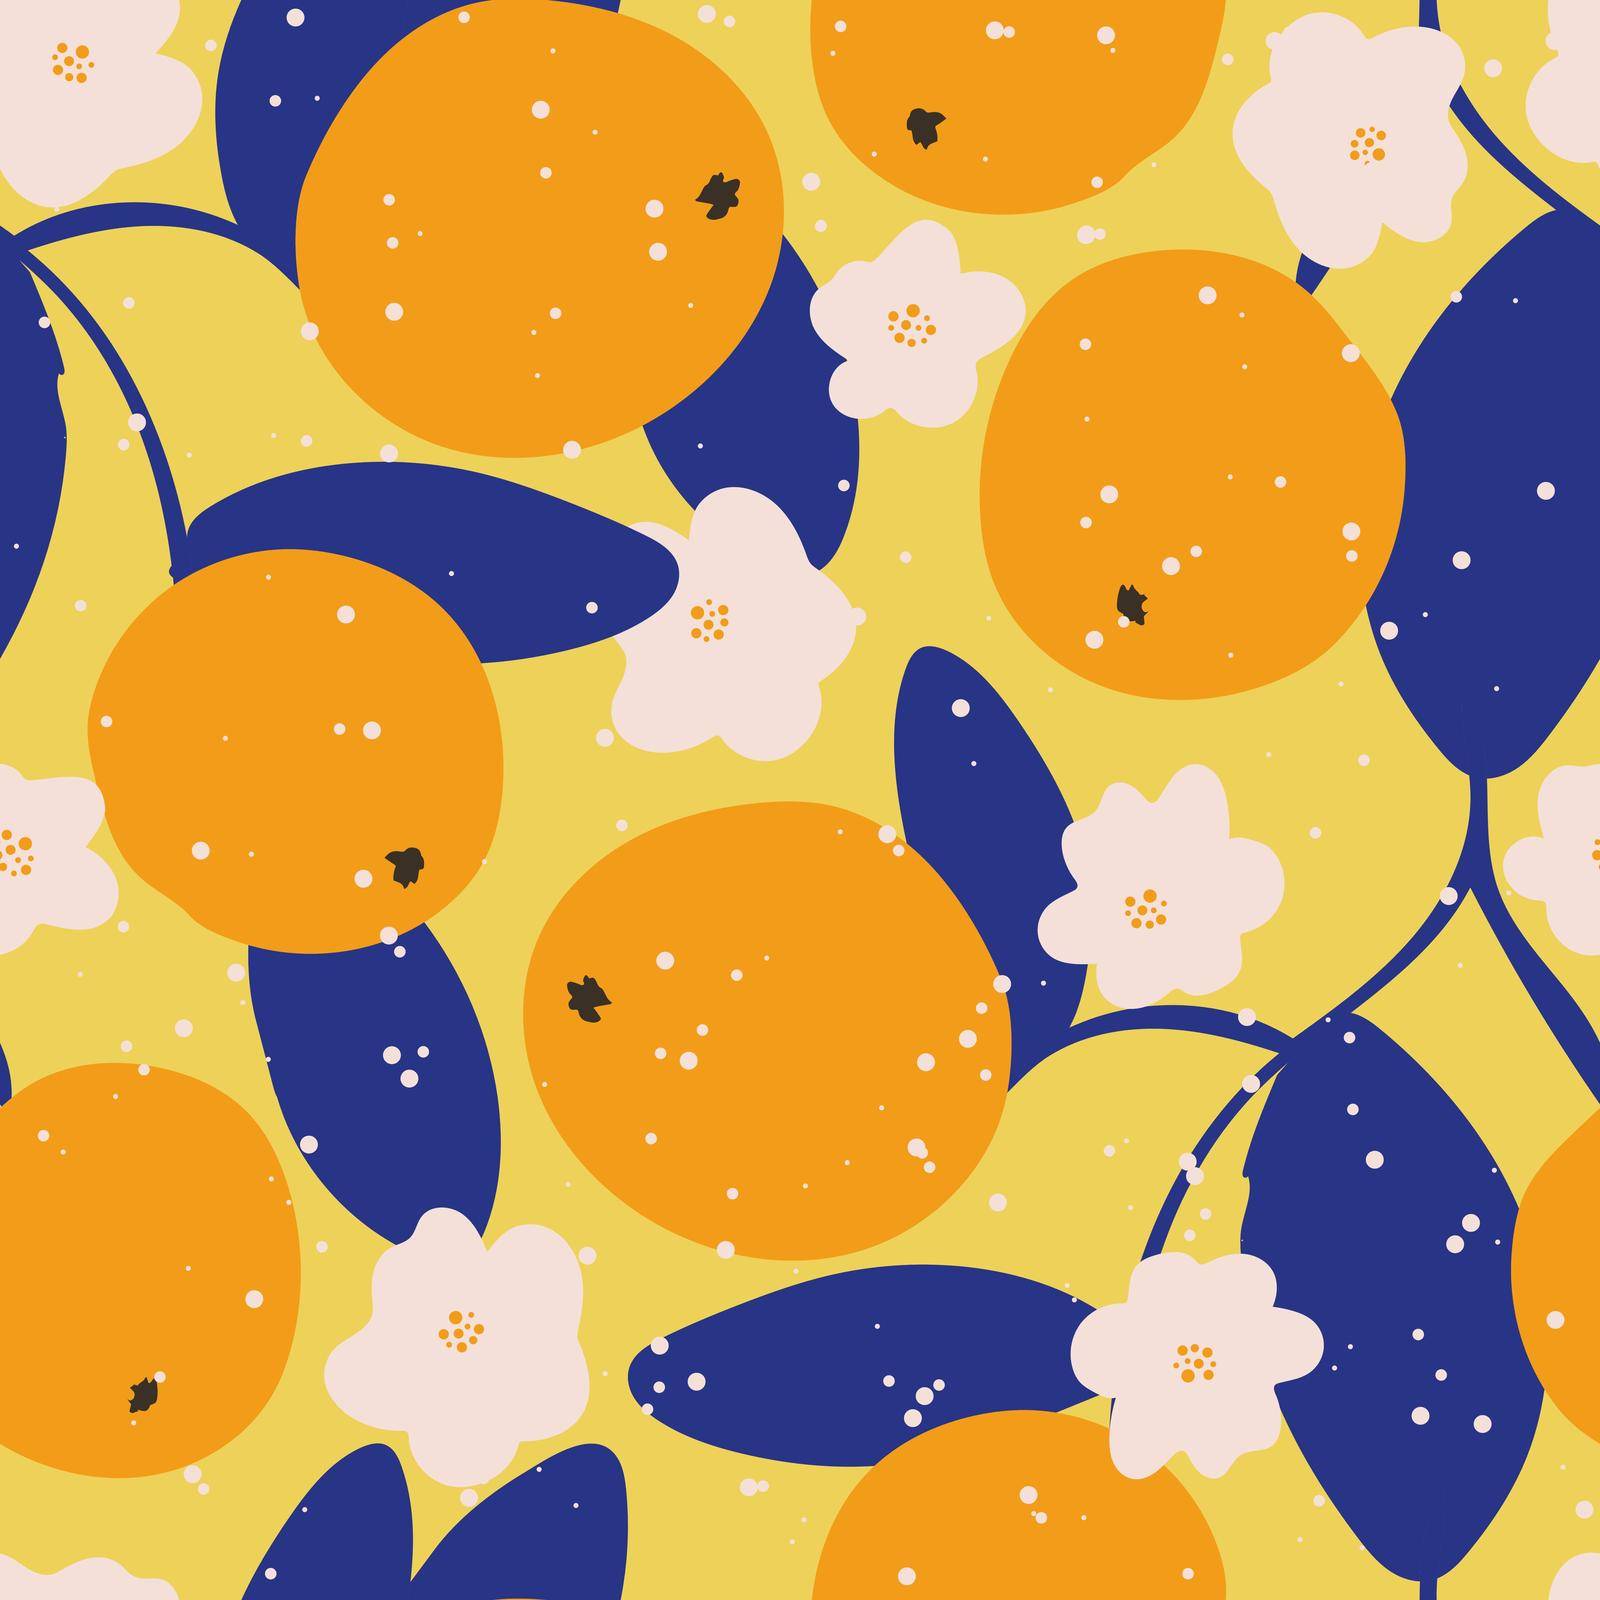 Citrus flowers and fruits seamless pattern by TassiaK